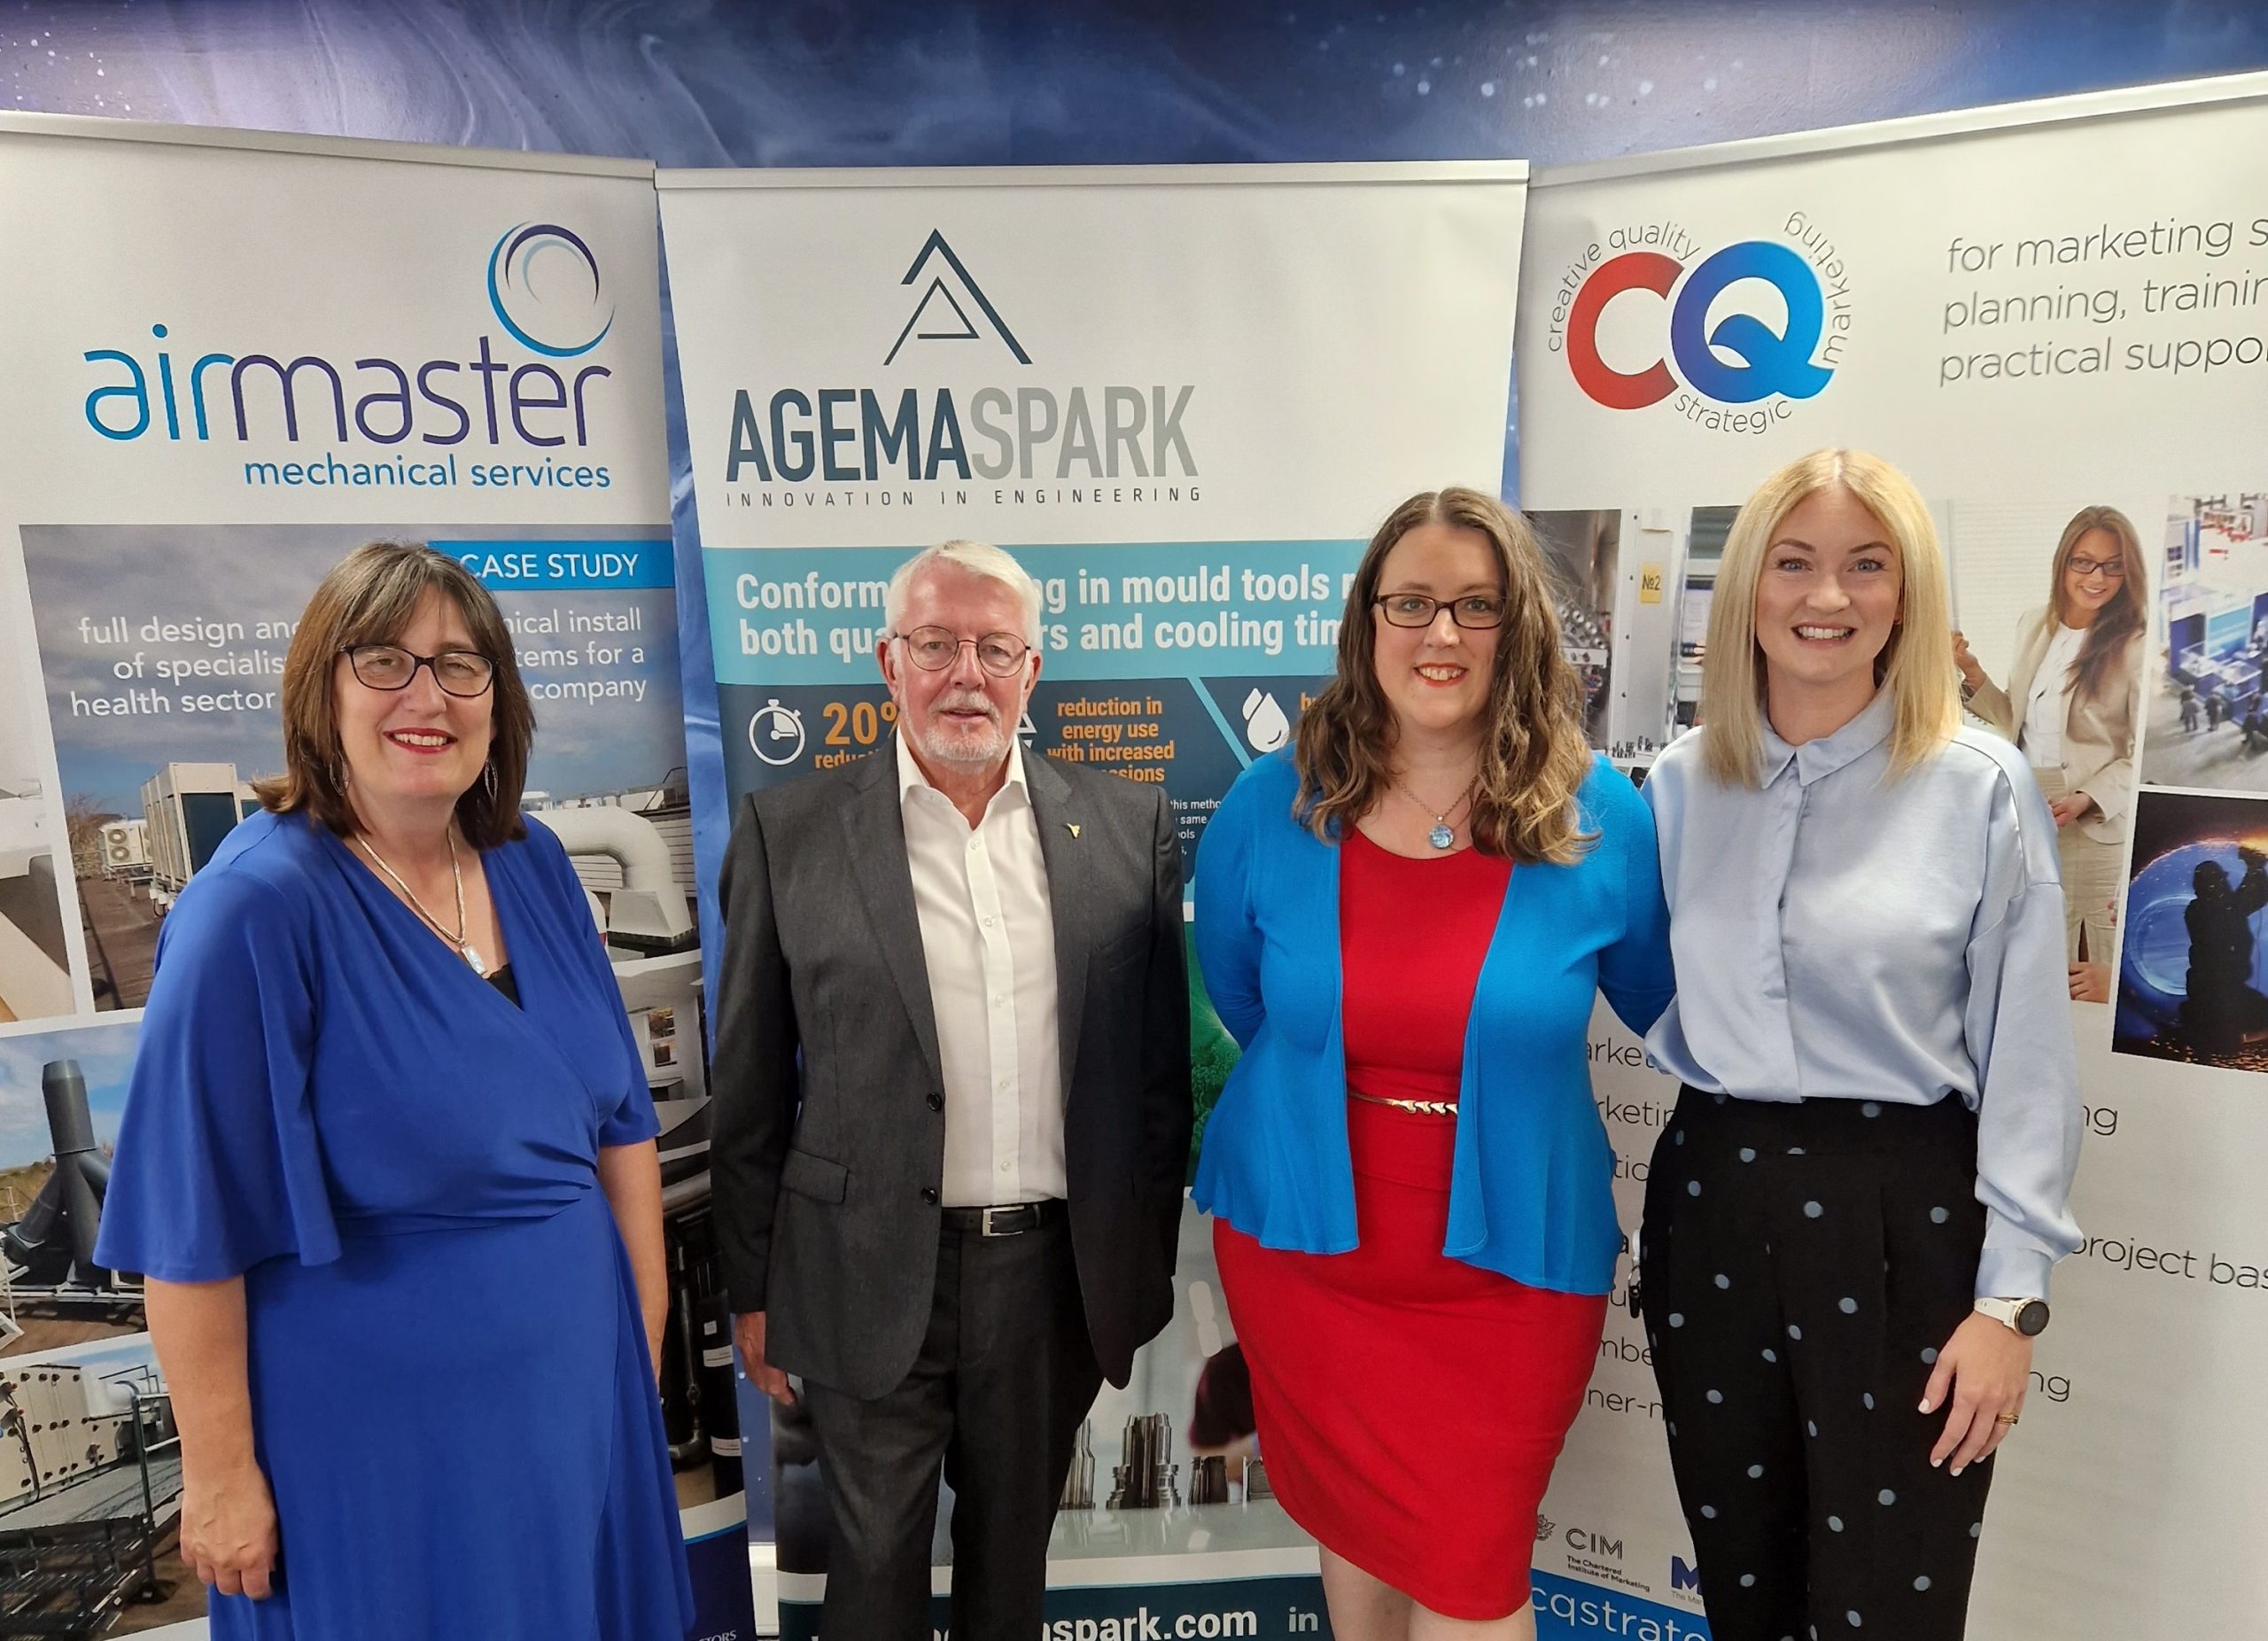 South Yorkshire based businesses CQ Strategic Marketing, Agemaspark and Airmaster celebrate 10, 20 and 30 years in business